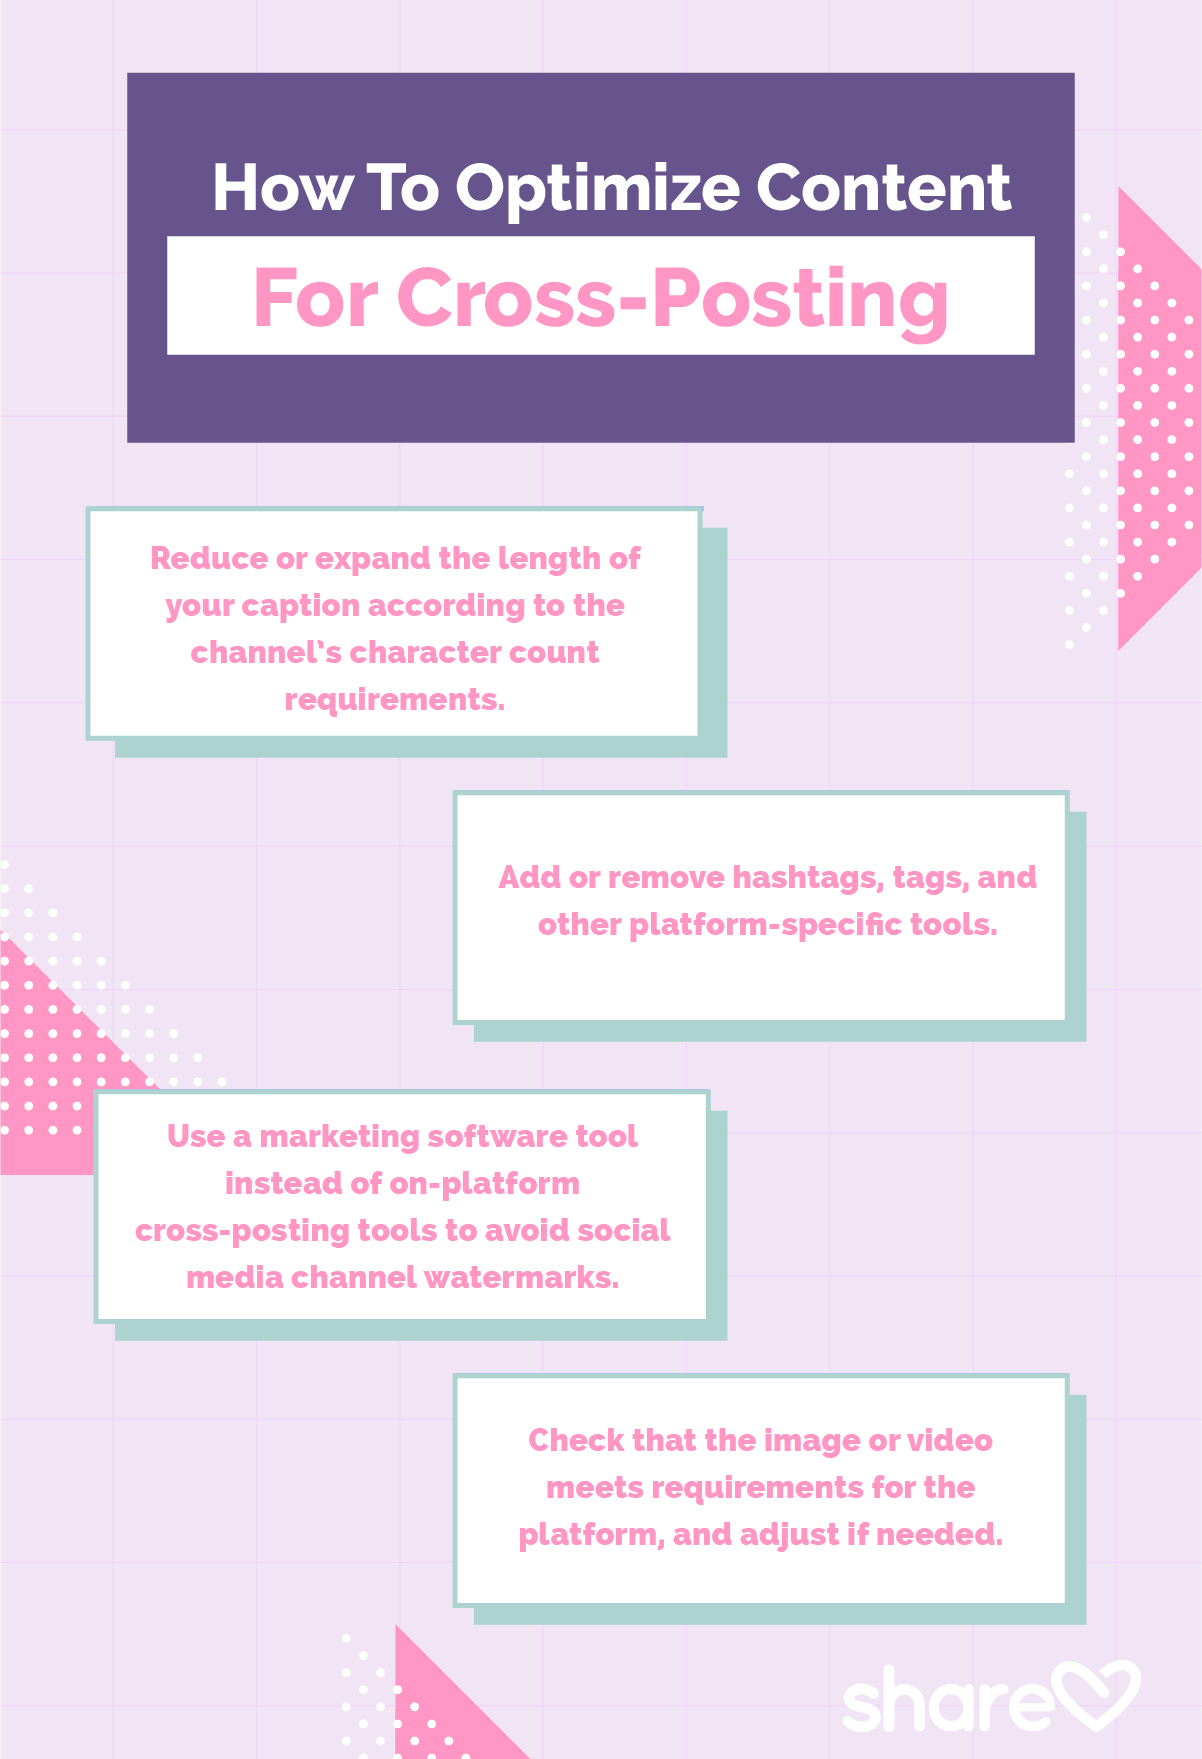 How To Optimize Content For Cross-Posting